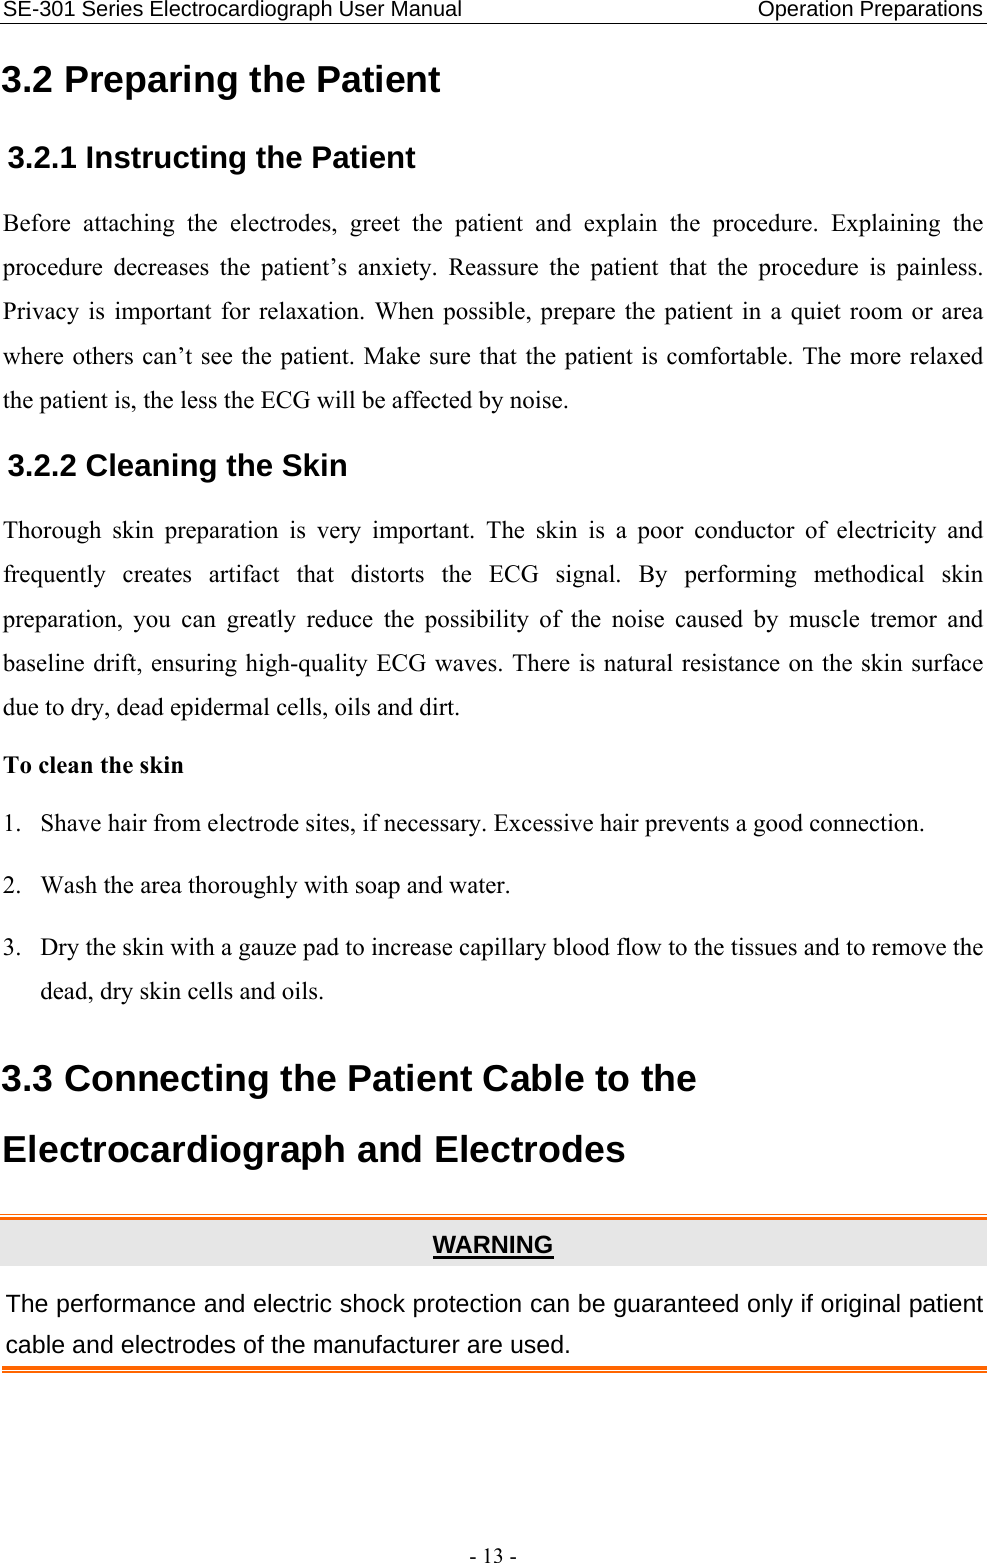 SE-301 Series Electrocardiograph User Manual                           Operation Preparations - 13 - 3.2 Preparing the Patient 3.2.1 Instructing the Patient Before attaching the electrodes, greet the patient and explain the procedure. Explaining the procedure decreases the patient’s anxiety. Reassure the patient that the procedure is painless. Privacy is important for relaxation. When possible, prepare the patient in a quiet room or area where others can’t see the patient. Make sure that the patient is comfortable. The more relaxed the patient is, the less the ECG will be affected by noise. 3.2.2 Cleaning the Skin Thorough skin preparation is very important. The skin is a poor conductor of electricity and frequently creates artifact that distorts the ECG signal. By performing methodical skin preparation, you can greatly reduce the possibility of the noise caused by muscle tremor and baseline drift, ensuring high-quality ECG waves. There is natural resistance on the skin surface due to dry, dead epidermal cells, oils and dirt. To clean the skin 1. Shave hair from electrode sites, if necessary. Excessive hair prevents a good connection. 2. Wash the area thoroughly with soap and water. 3. Dry the skin with a gauze pad to increase capillary blood flow to the tissues and to remove the dead, dry skin cells and oils. 3.3 Connecting the Patient Cable to the Electrocardiograph and Electrodes WARNING The performance and electric shock protection can be guaranteed only if original patient cable and electrodes of the manufacturer are used.   